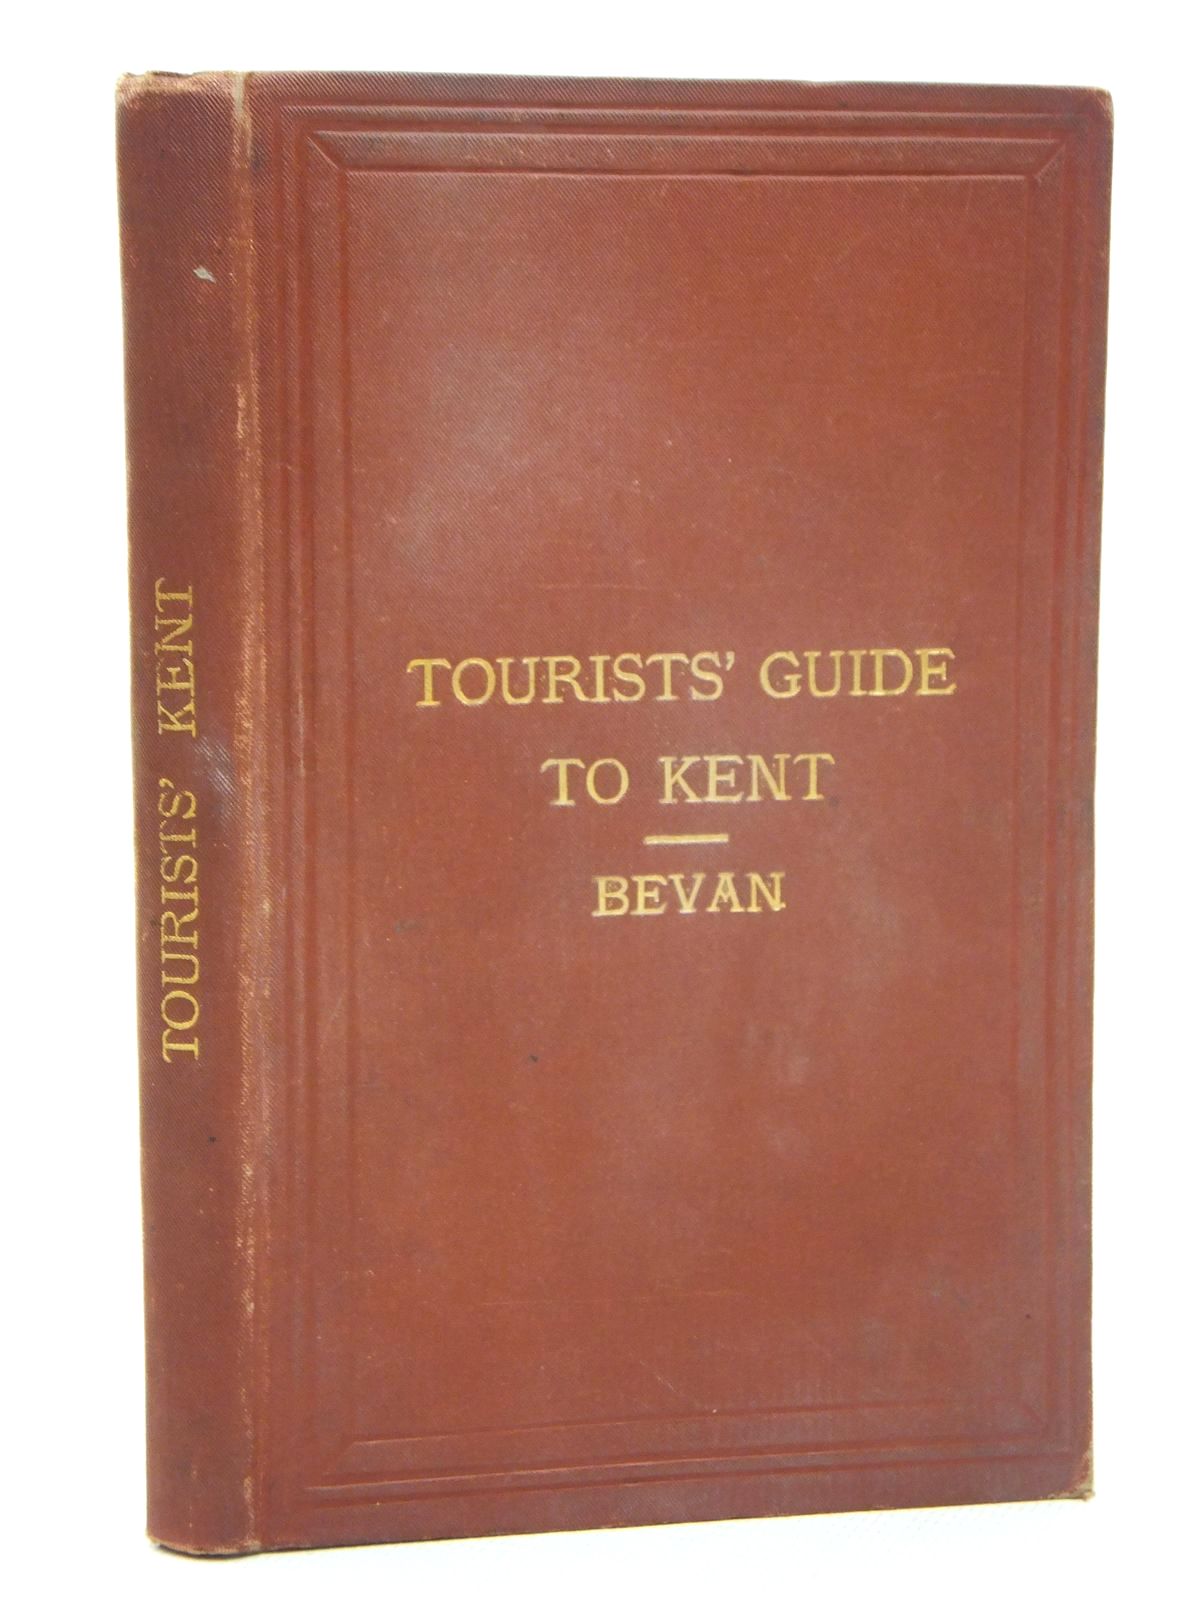 Photo of HANDBOOK TO THE COUNTY OF KENT (TOURISTS' GUIDE) written by Bevan, G. Phillips published by Edward Stanford (STOCK CODE: 1609471)  for sale by Stella & Rose's Books